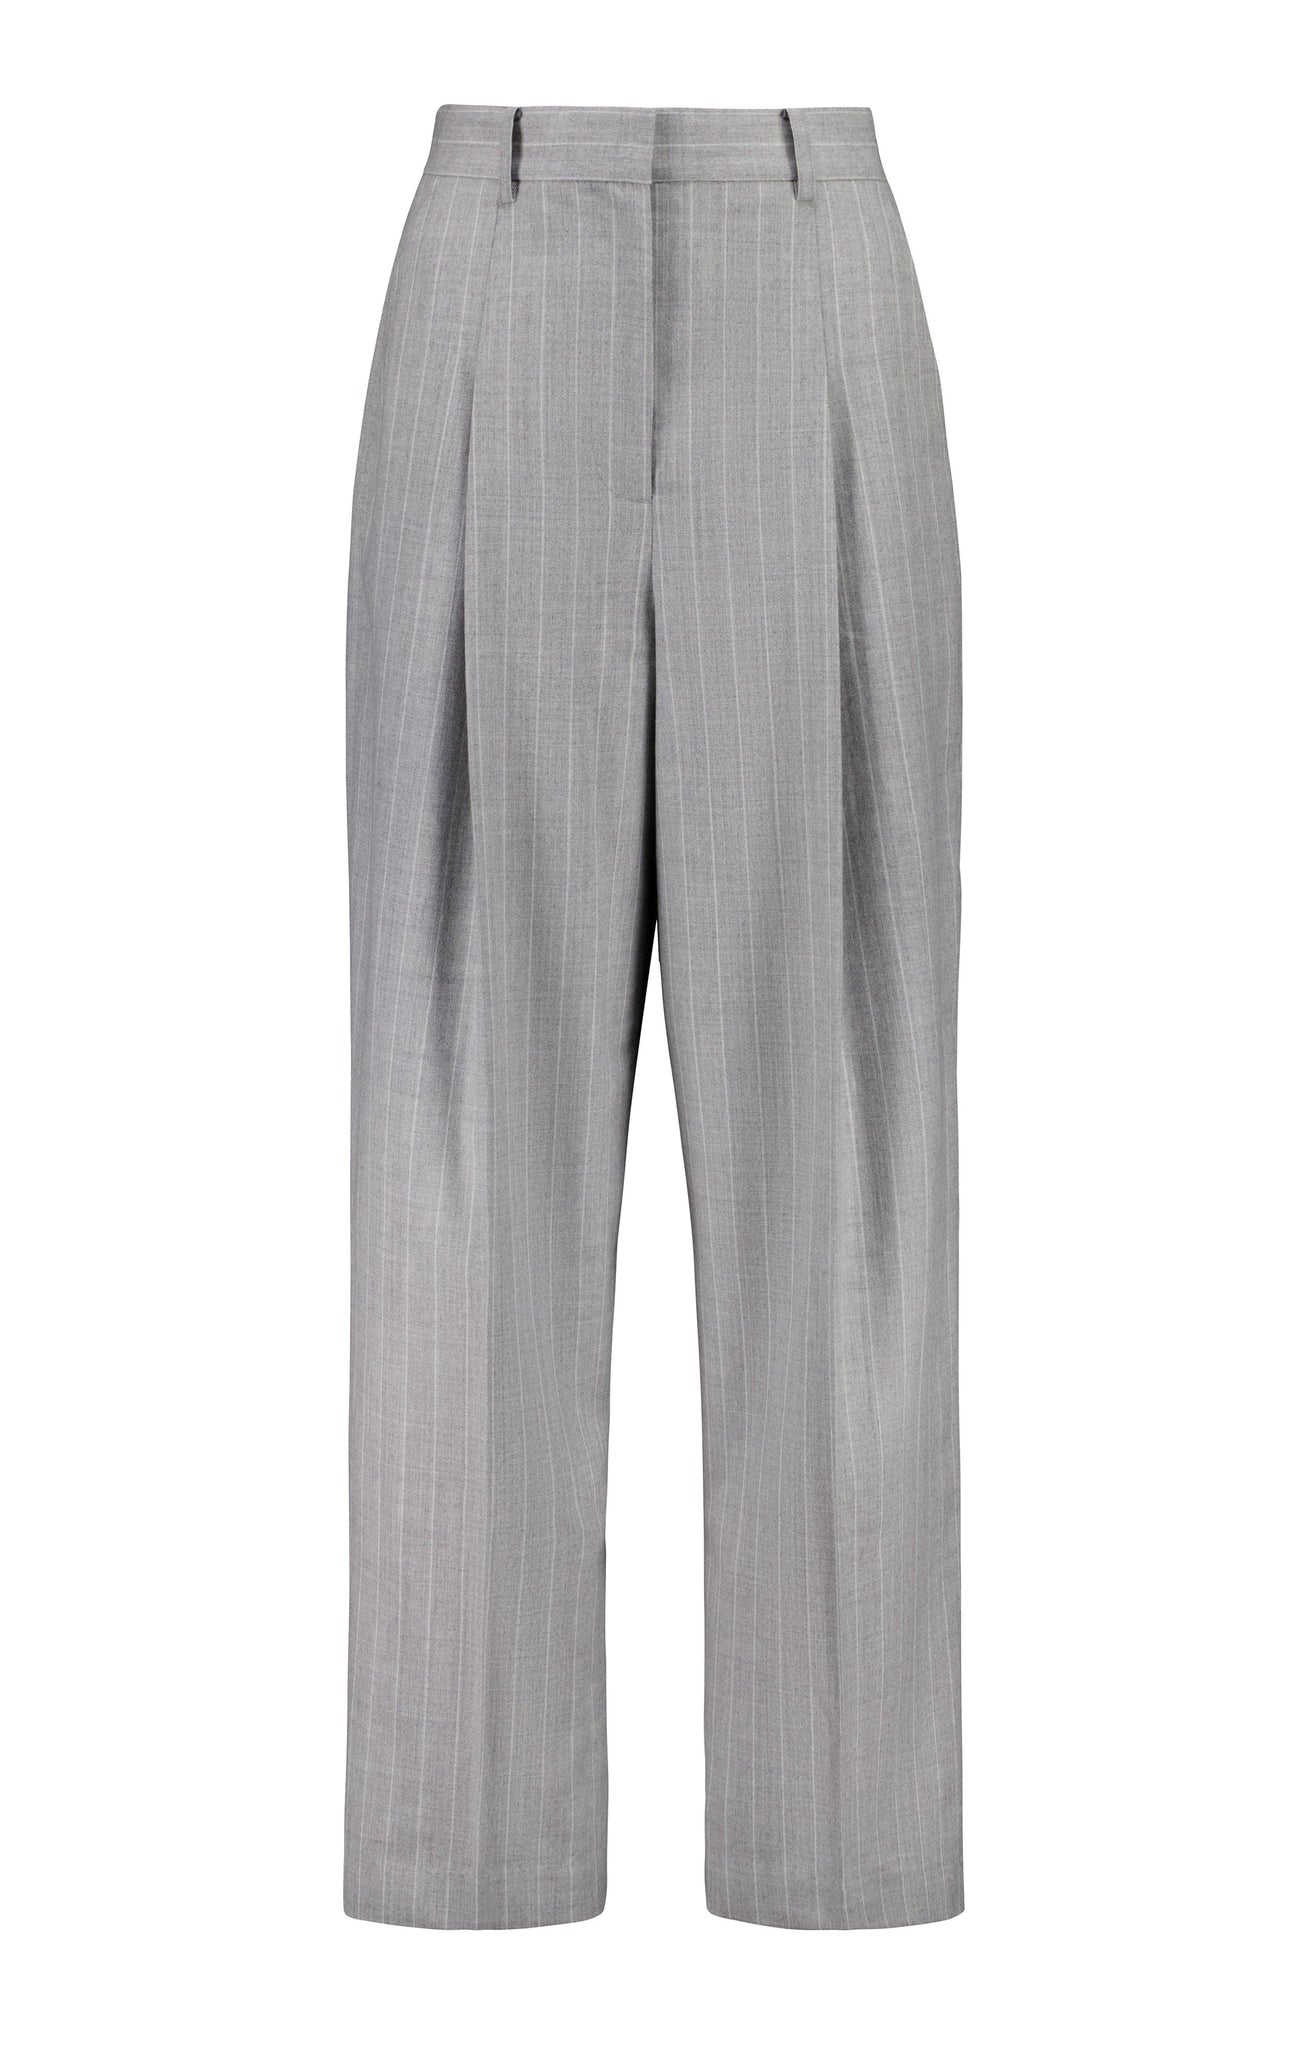 Gray Wool Pinstripe Wide Leg Pant - Skin and Threads